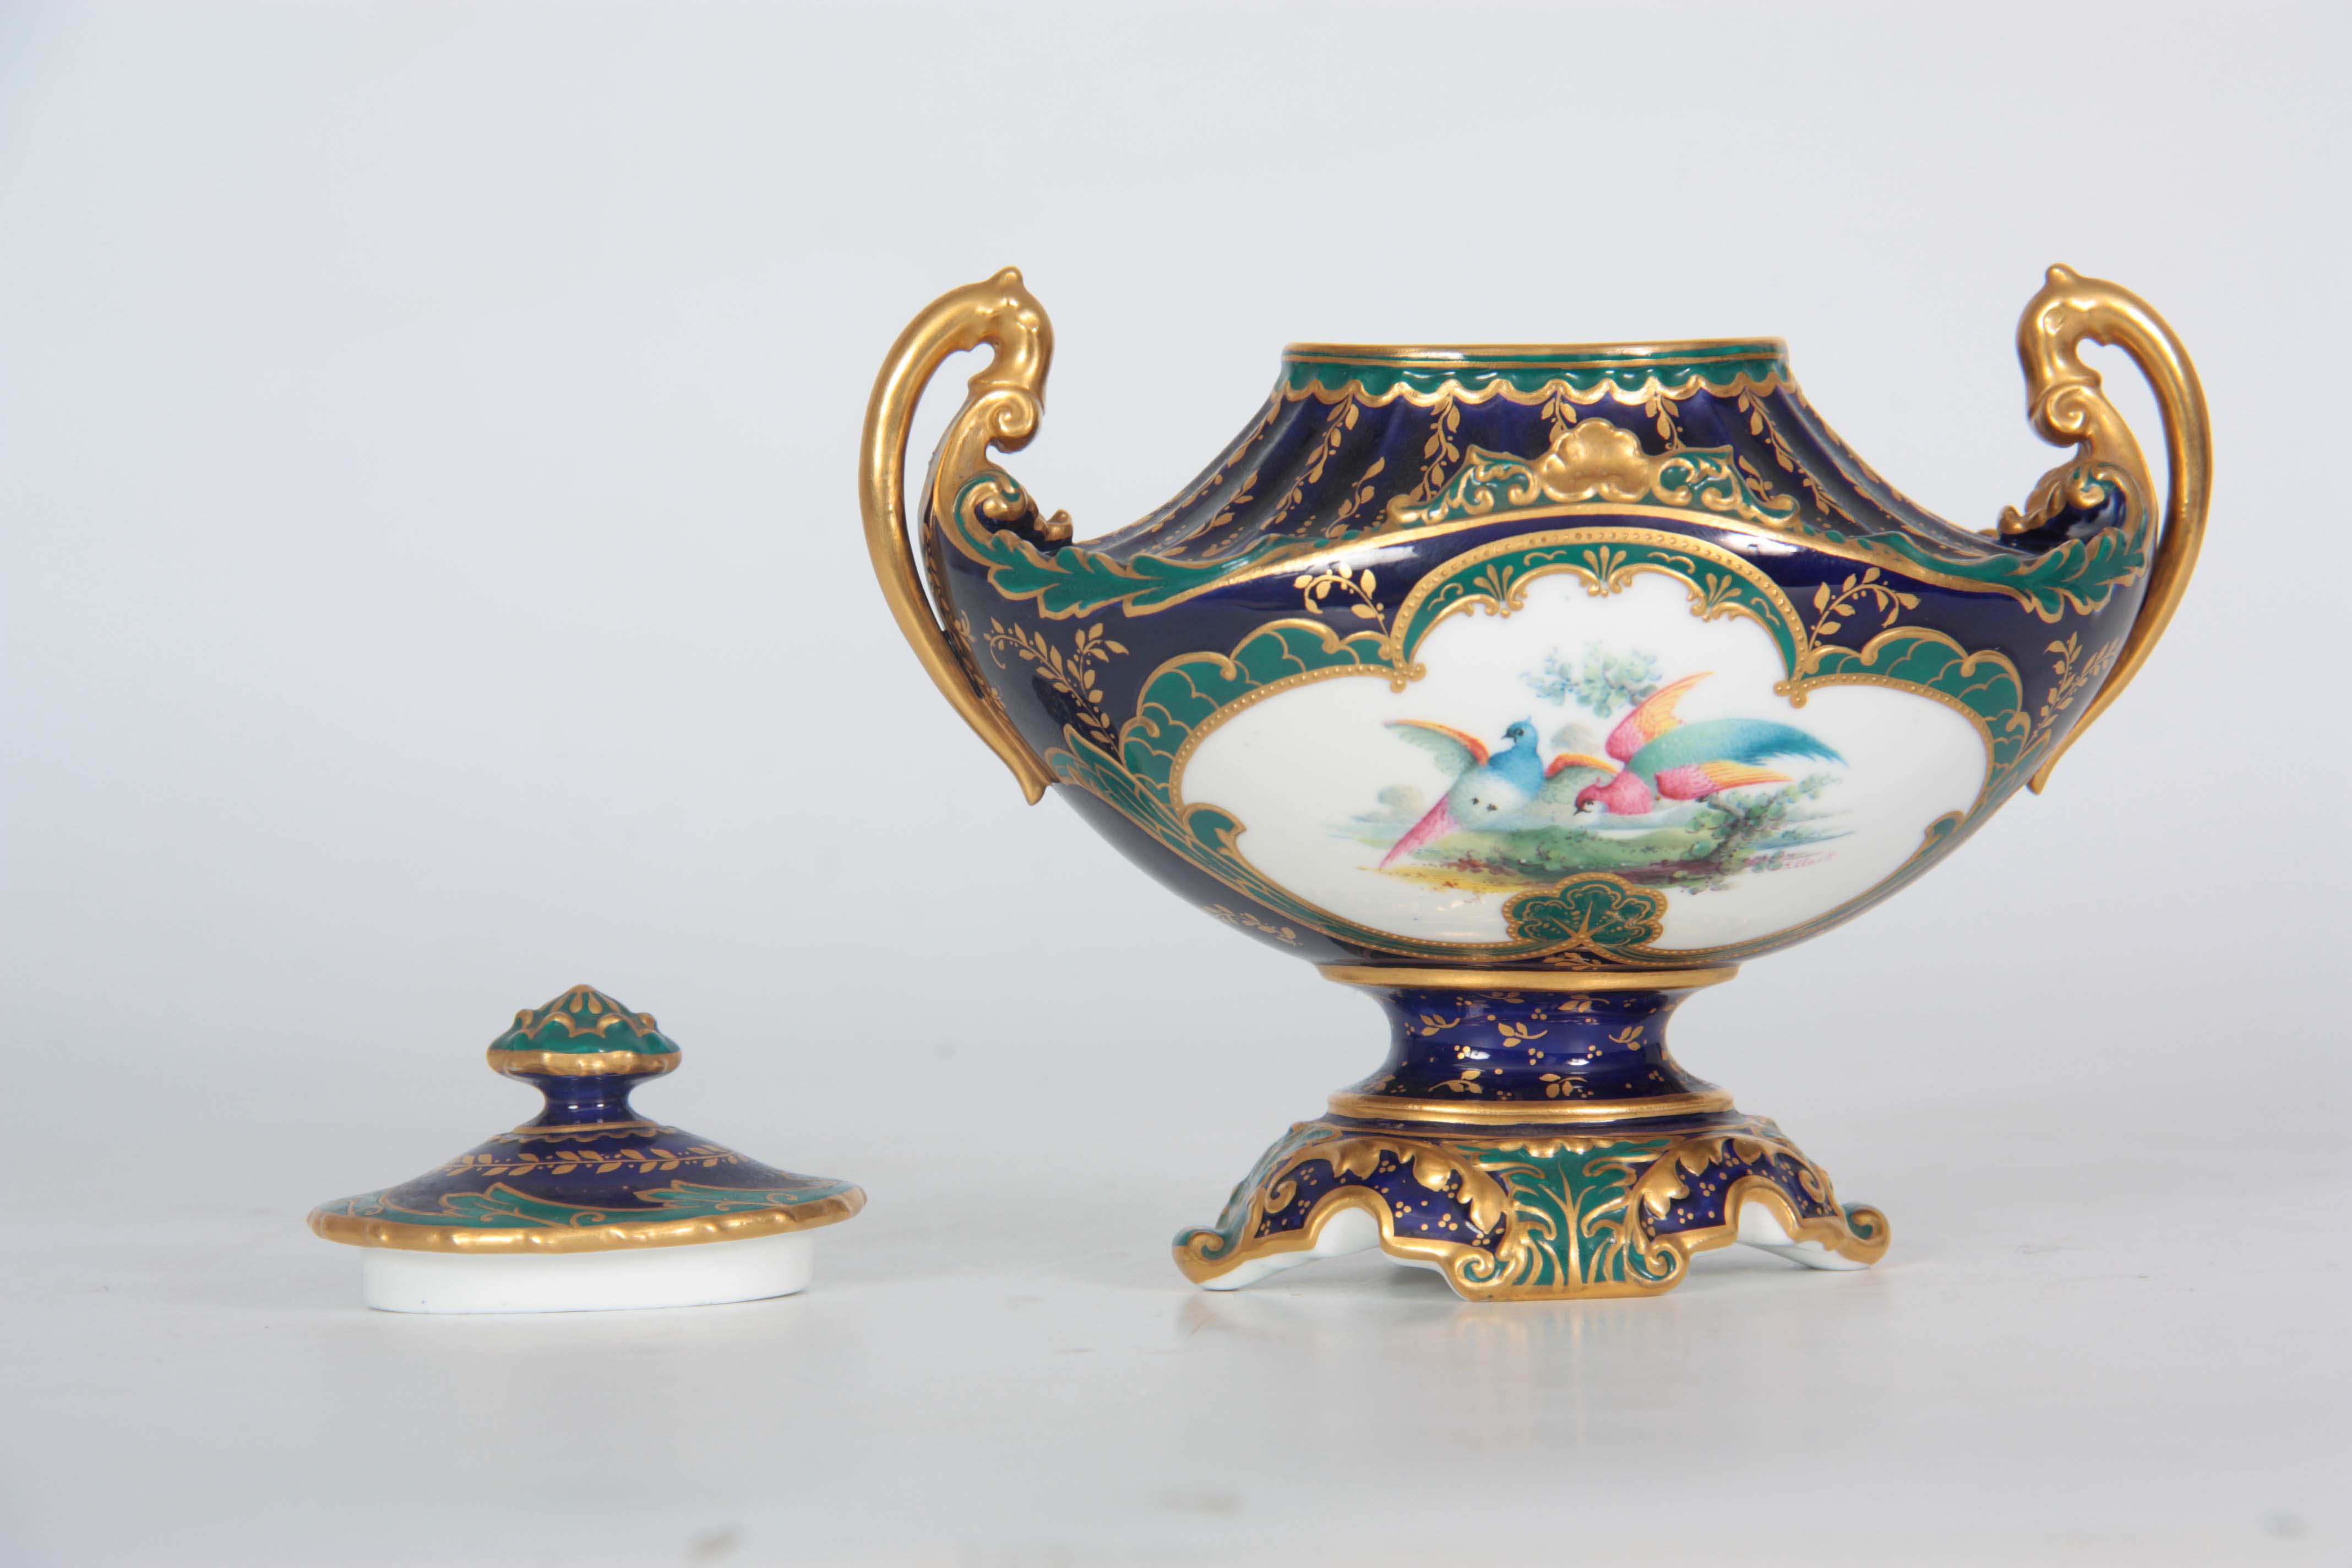 AN ORNATE ROYAL CROWN DERBY GILT TWO-HANDLED BOAT-SHAPED PEDESTAL CABINET VASE AND COVER of fanned - Image 3 of 5